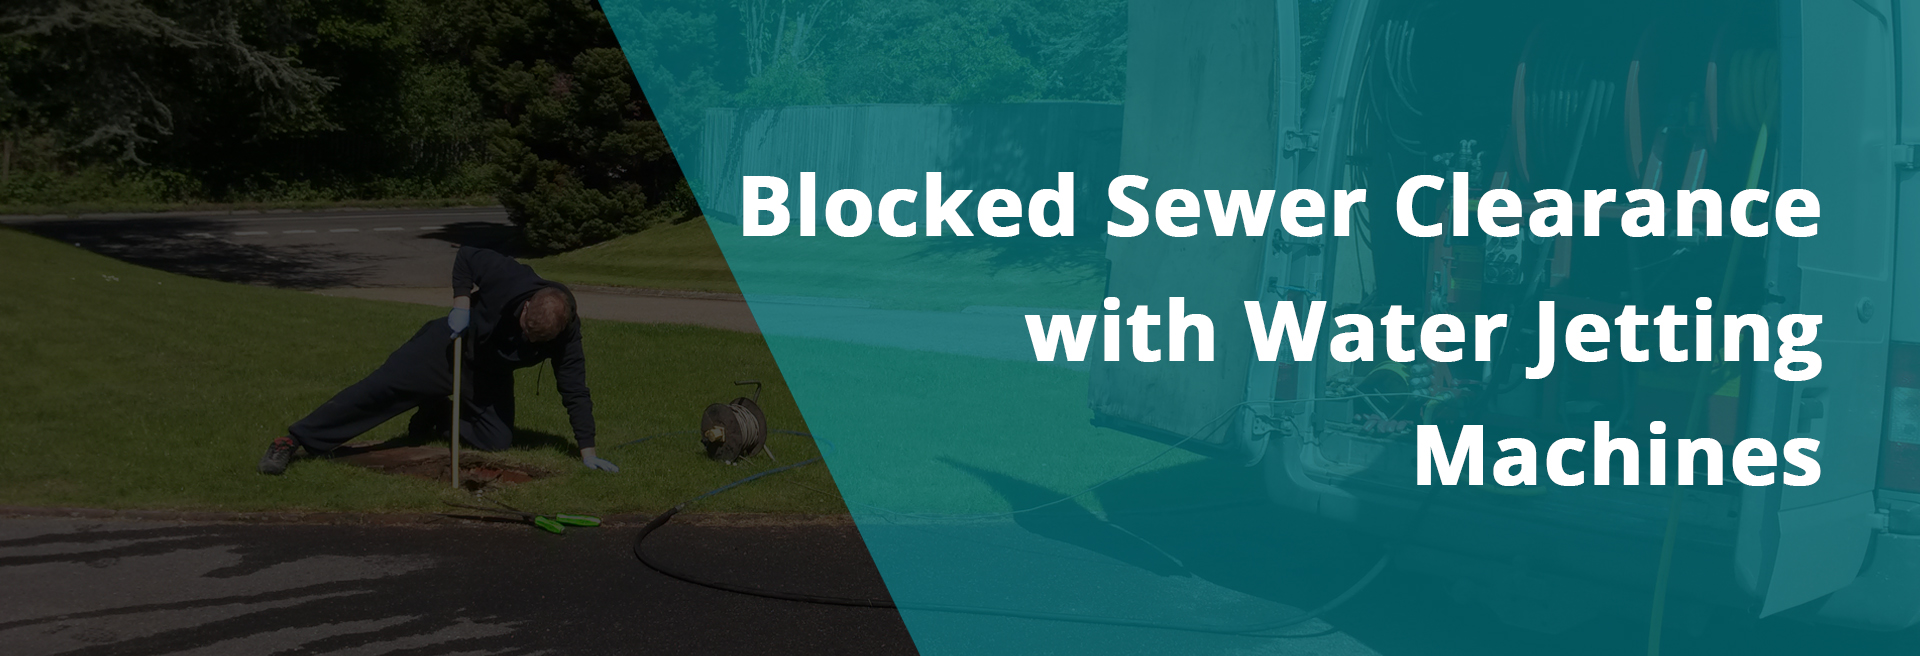 Blocked Sewer Clearance with Water Jetting Machines